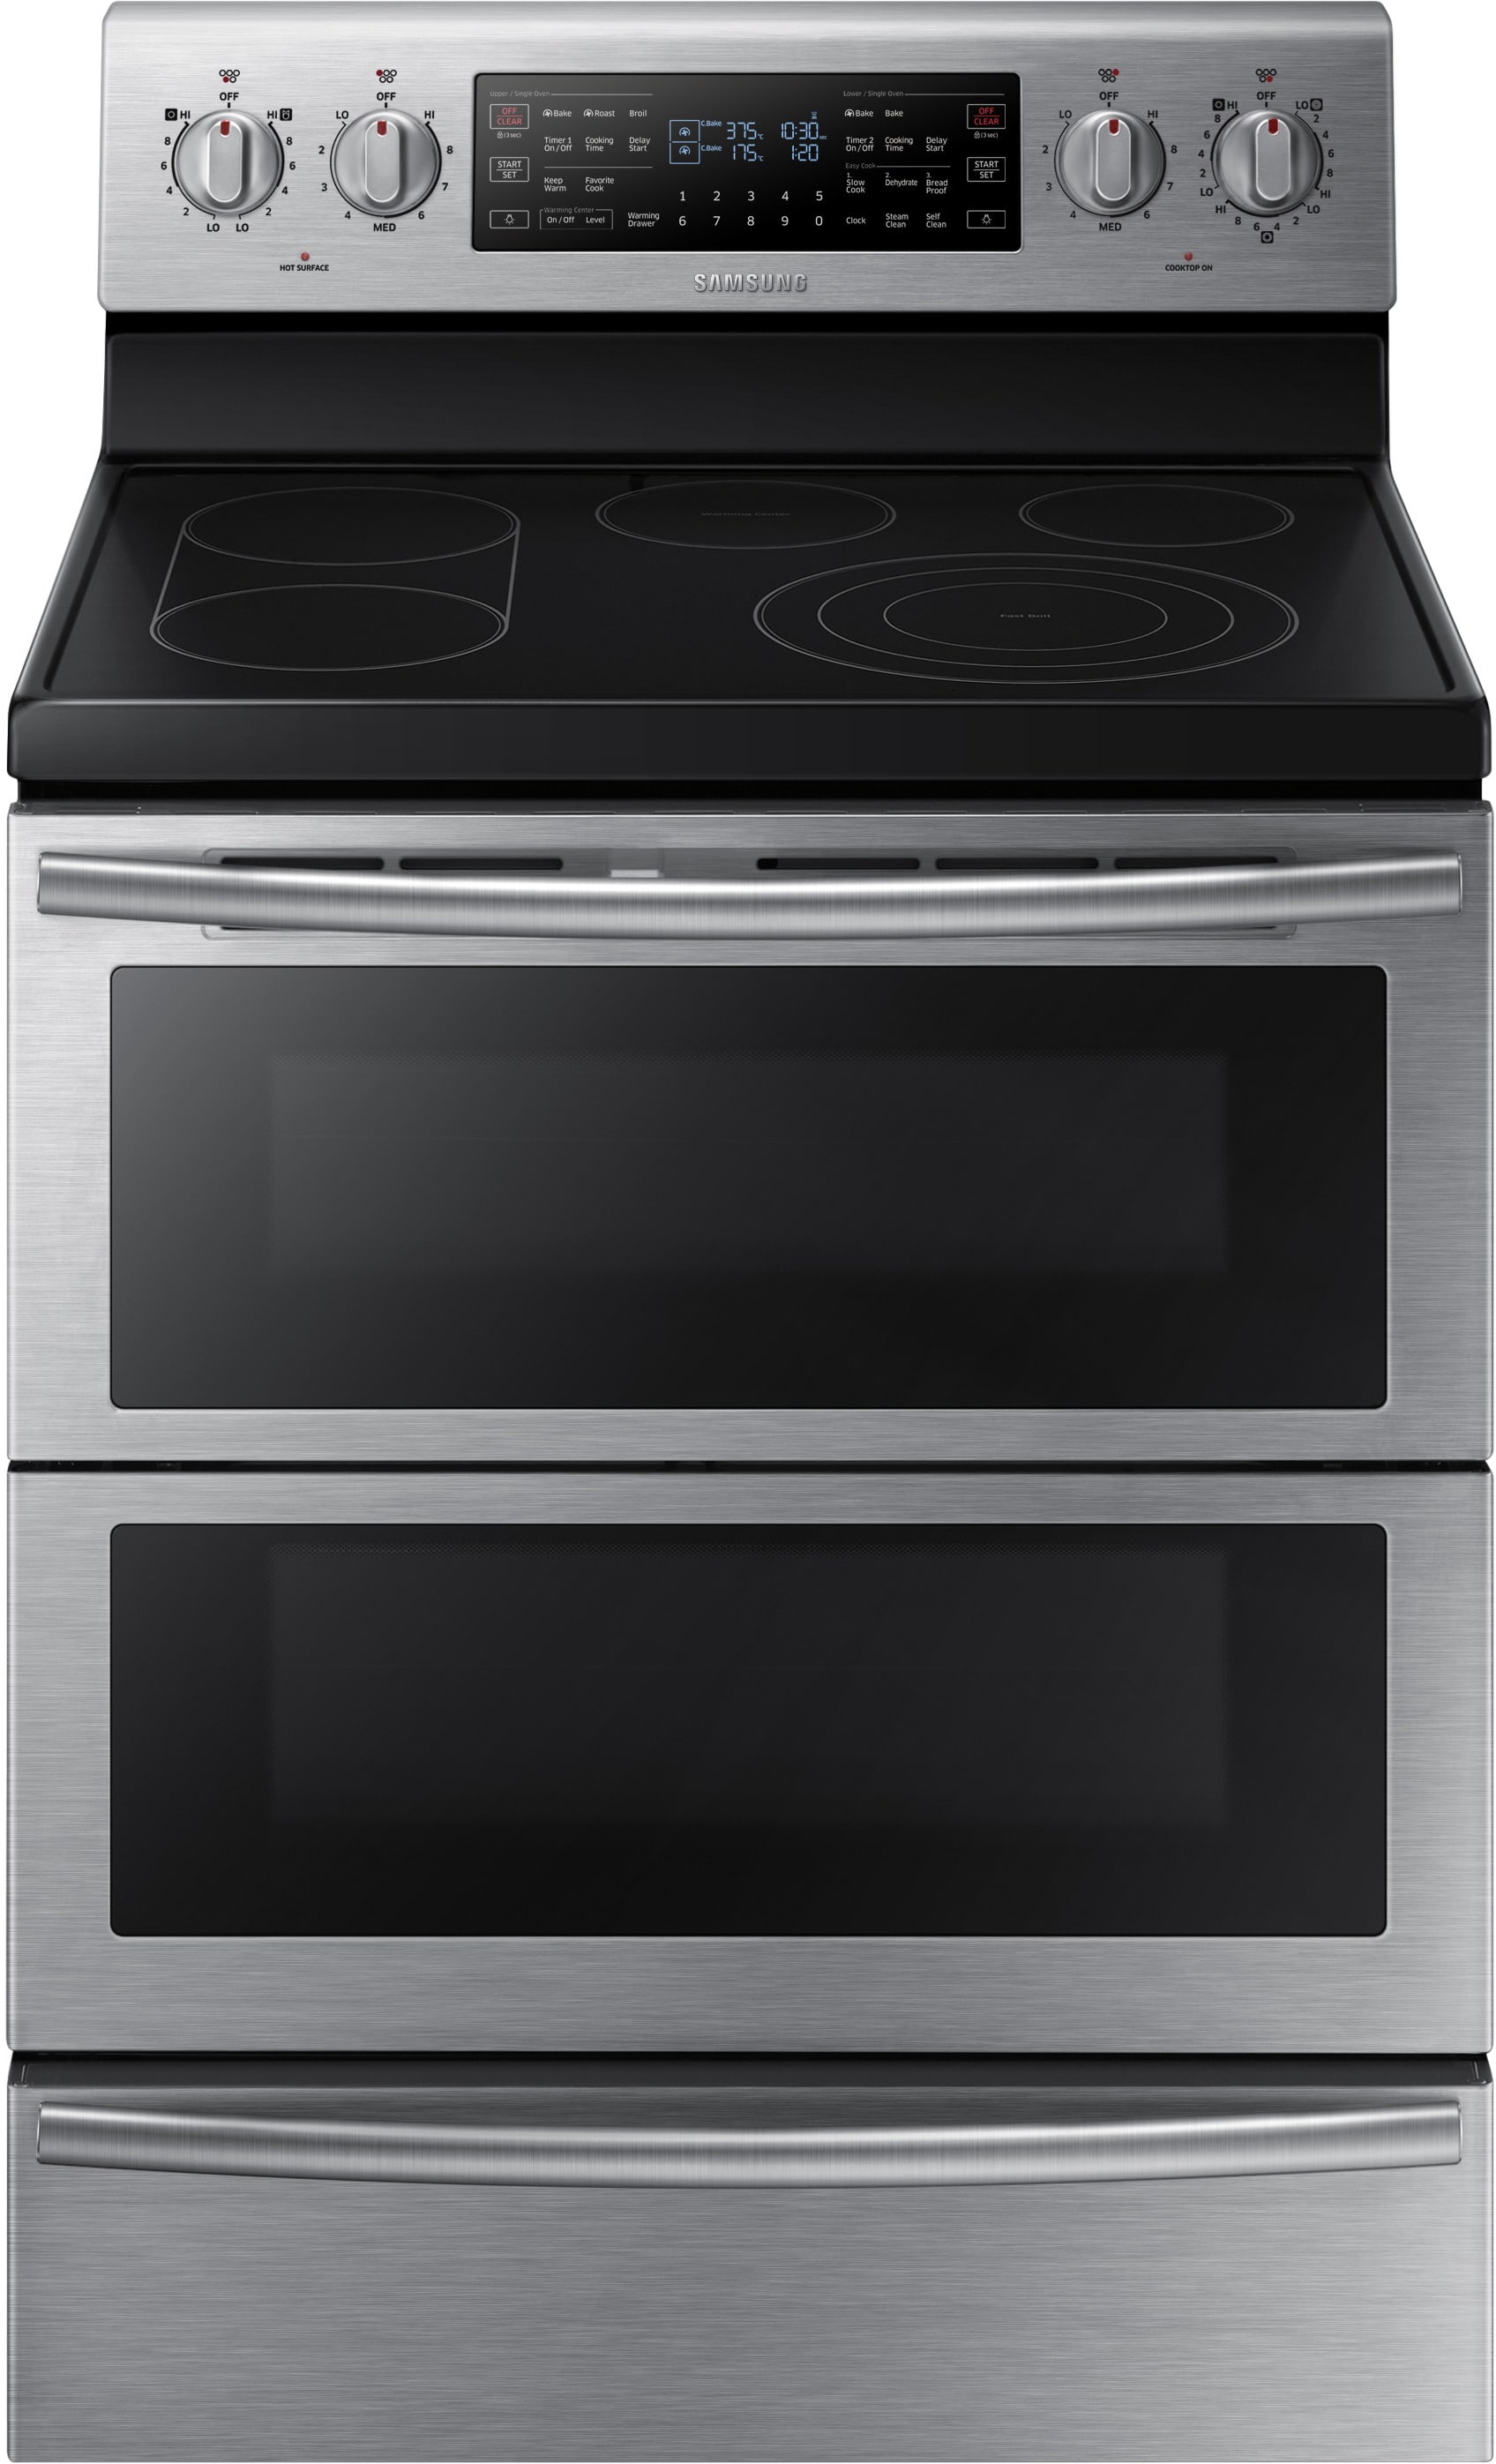 samsung self clean gas oven instructions